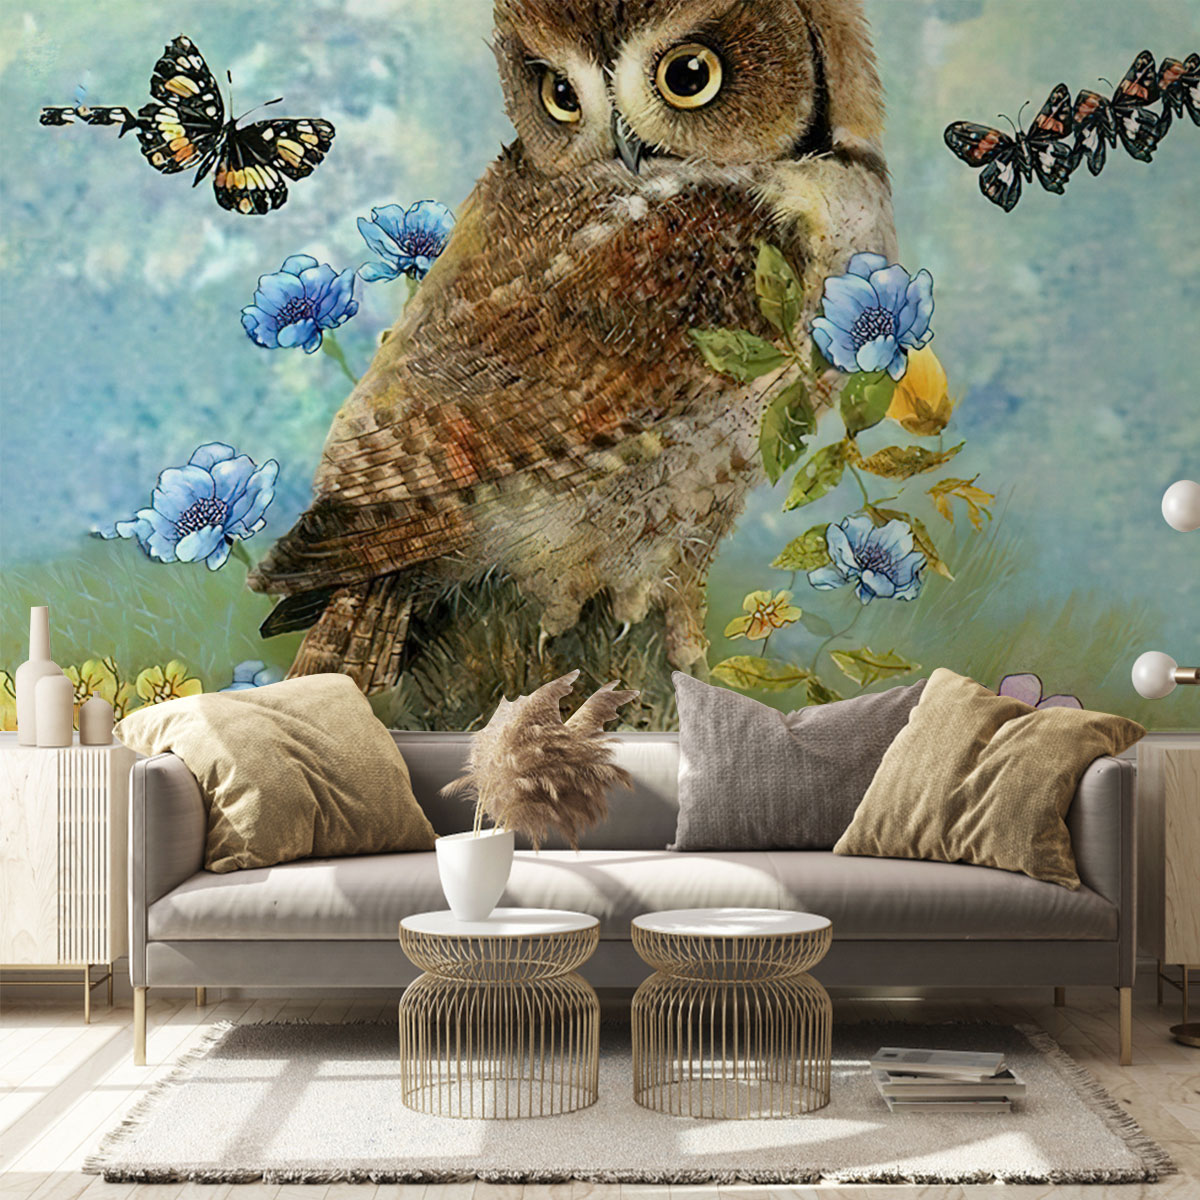 Owl And Butterfly Wall Mural